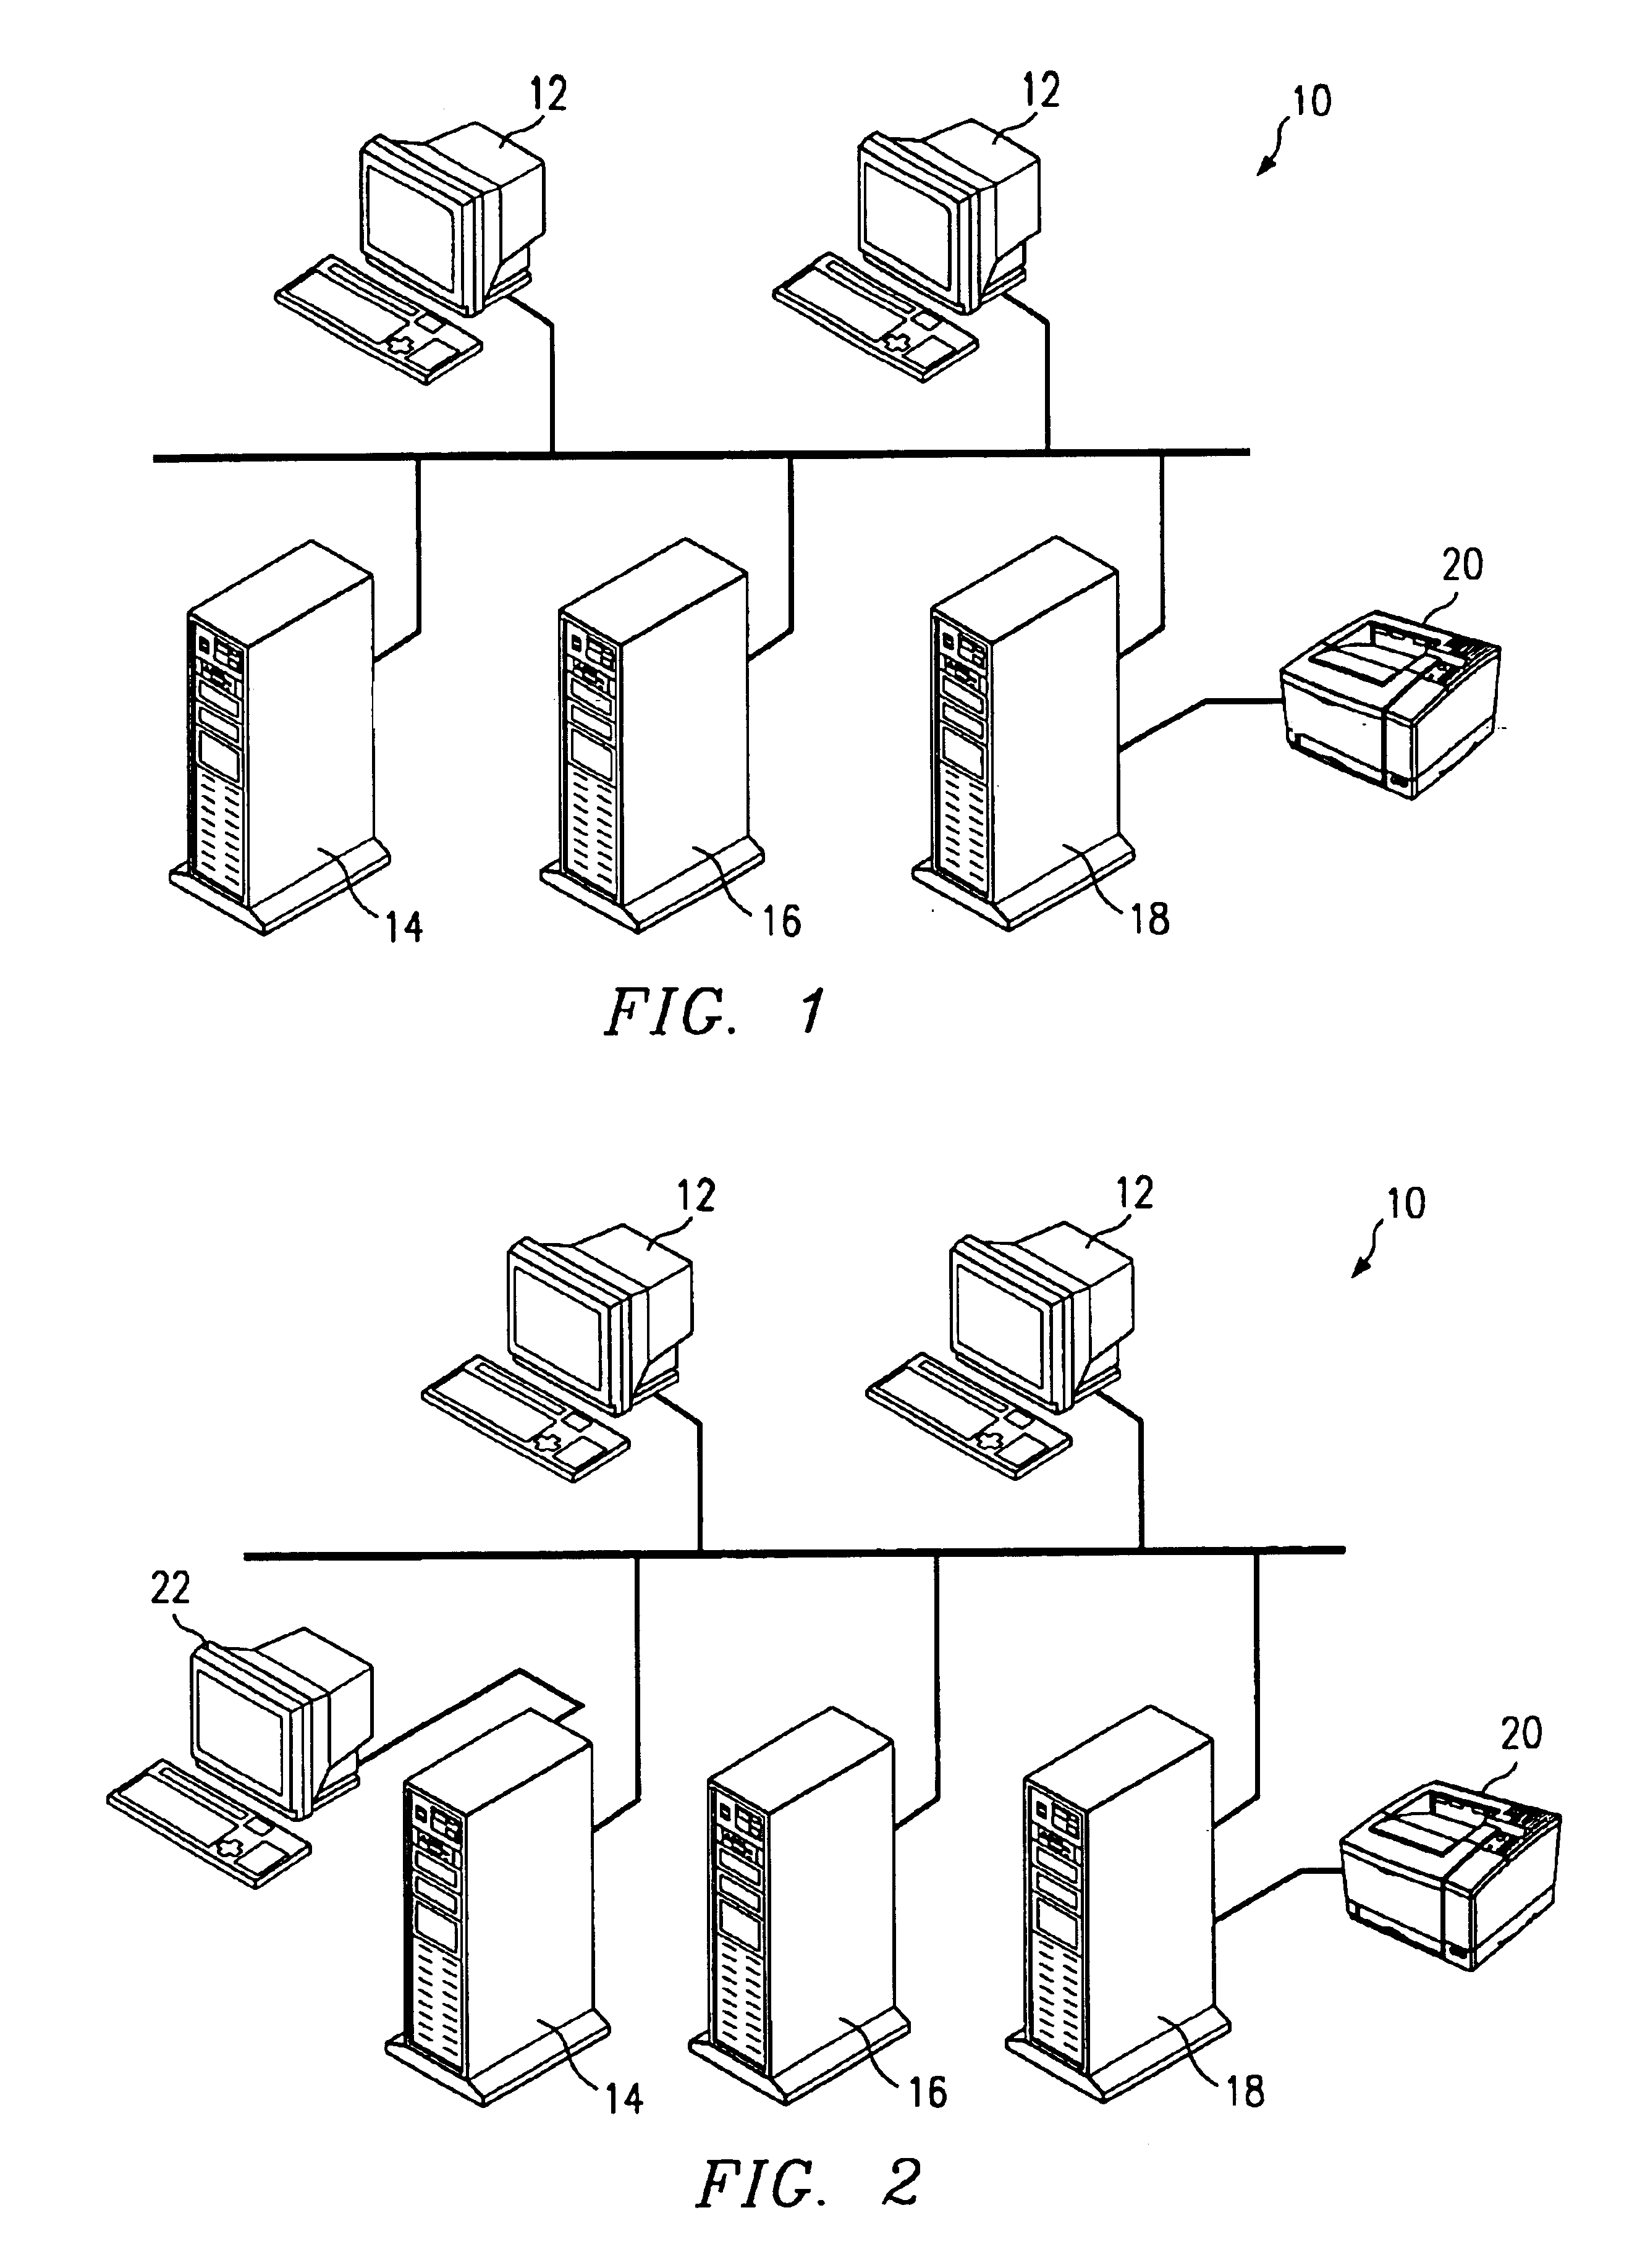 System and method for device configuration and management using a universal serial bus port